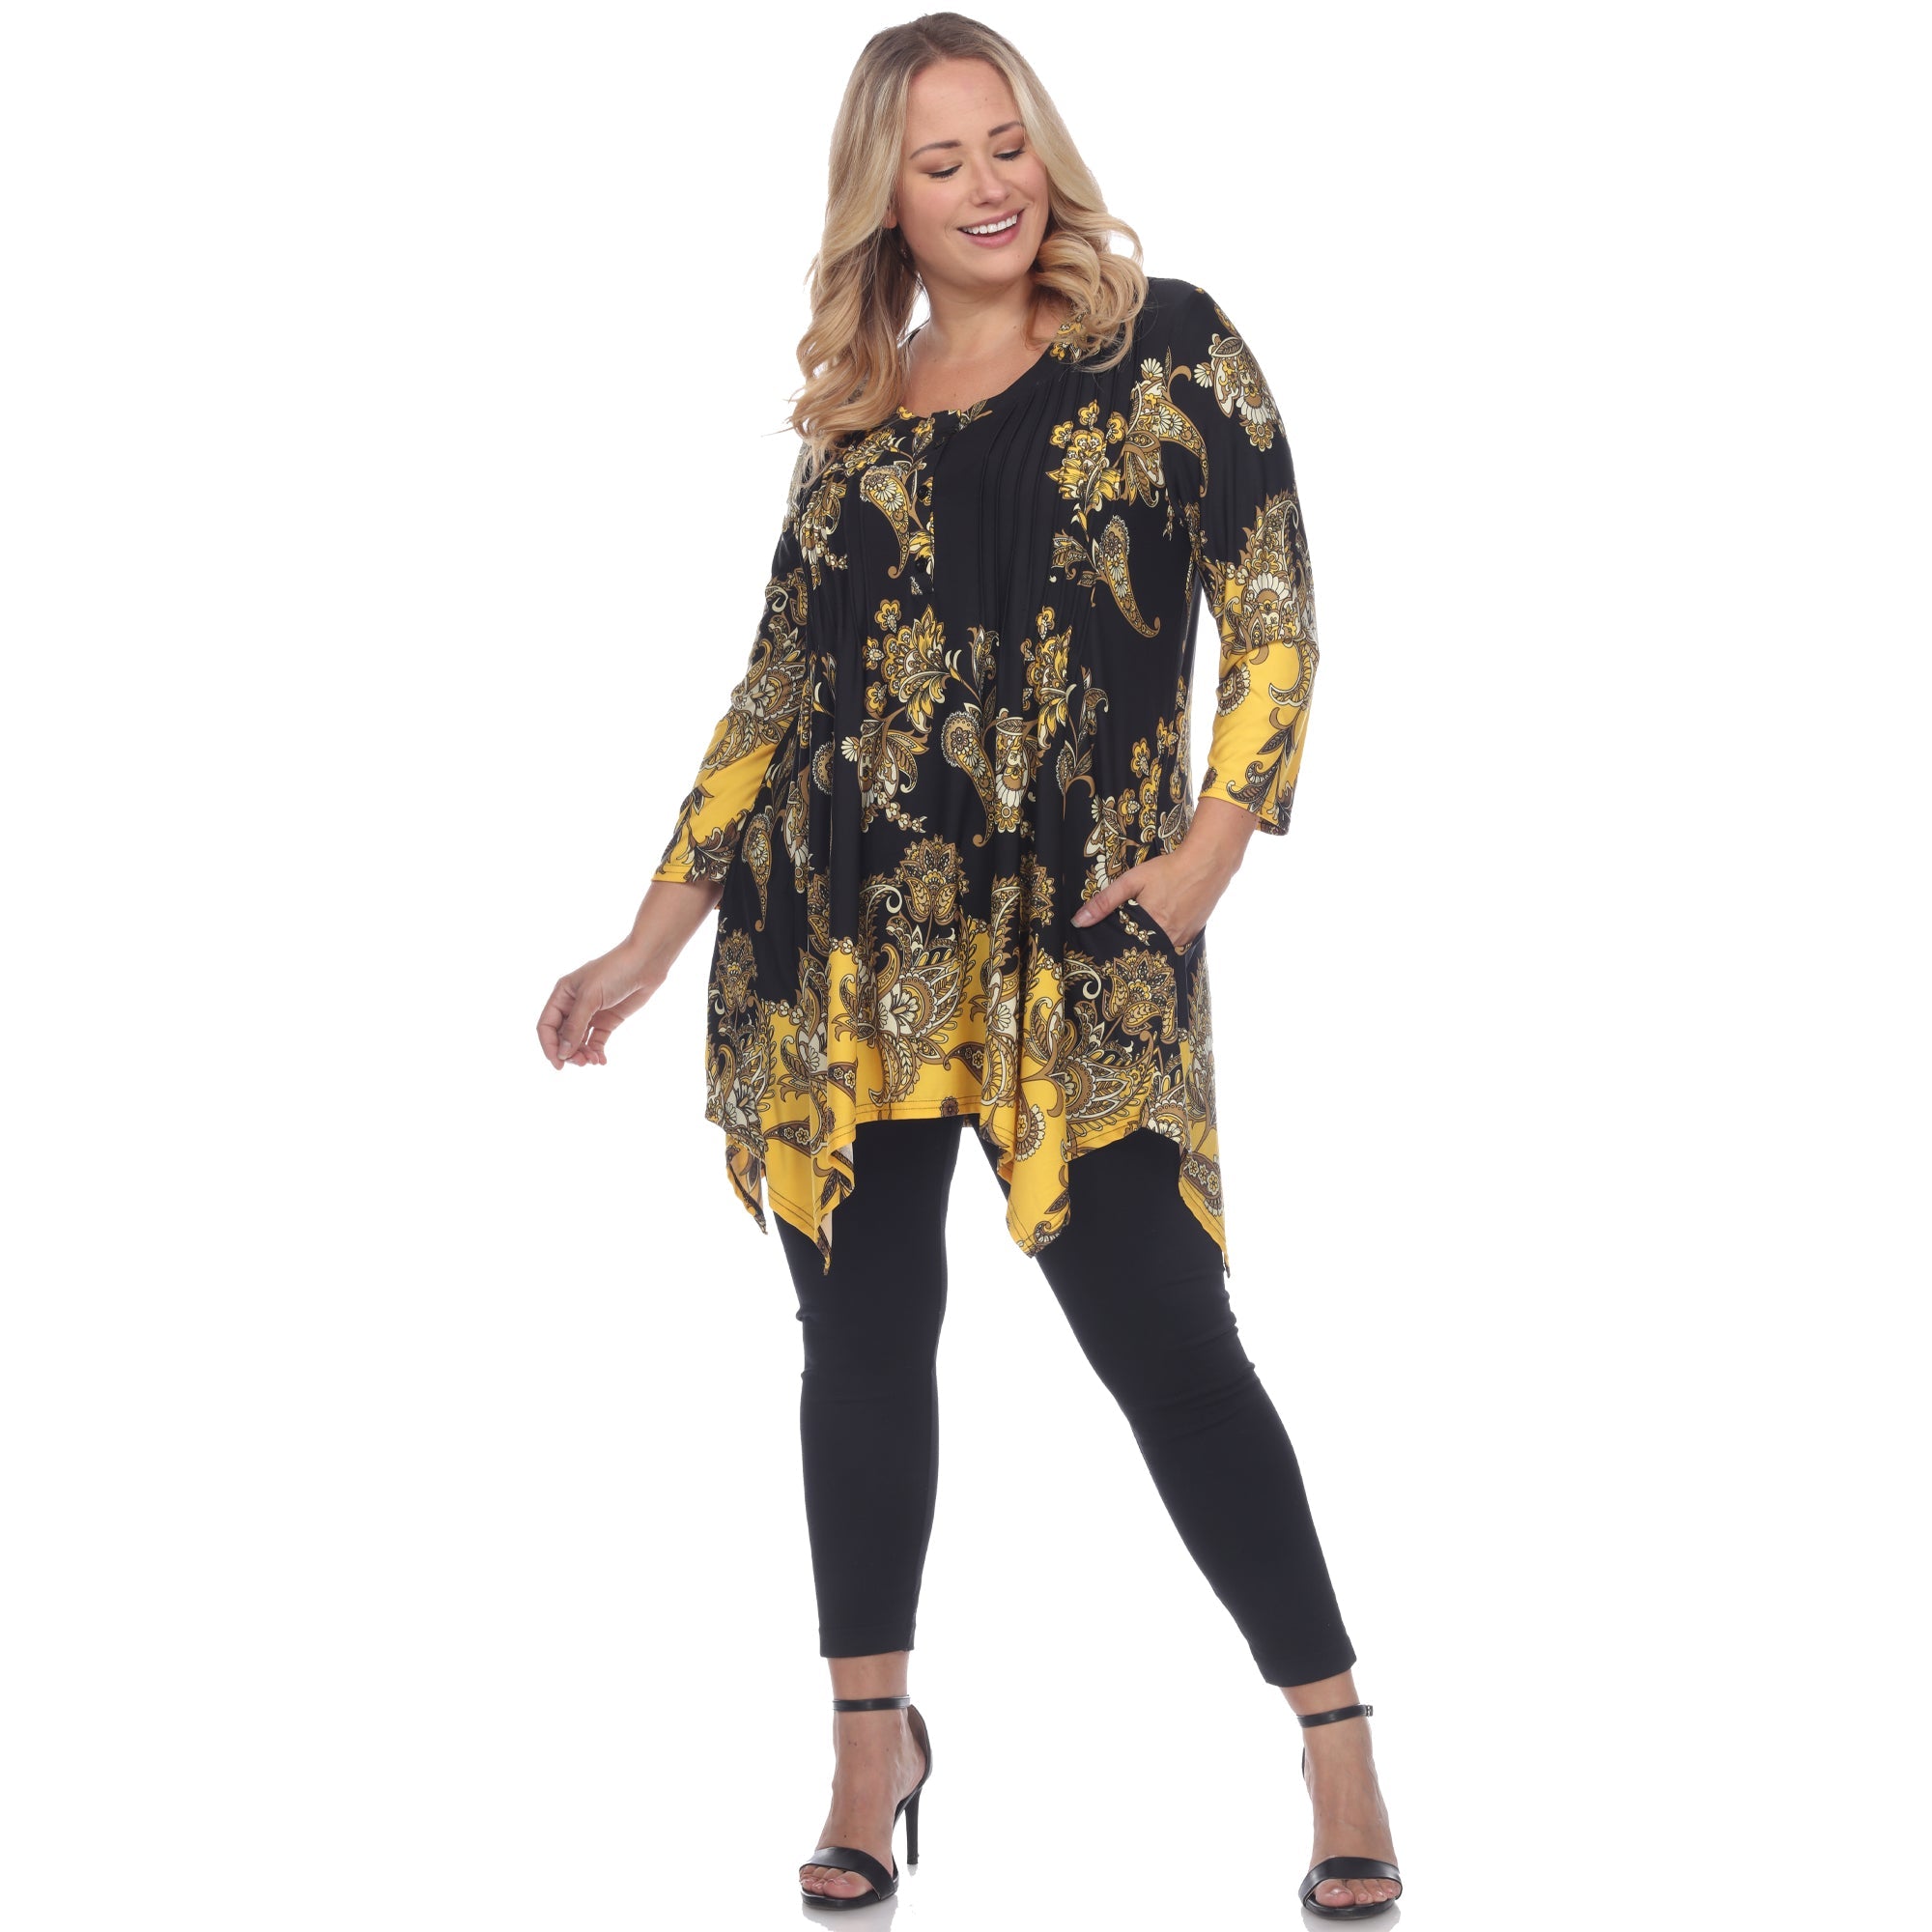 Floral Chain Printed Tunic Top with Pockets - Plus - DressbarnShirts & Blouses